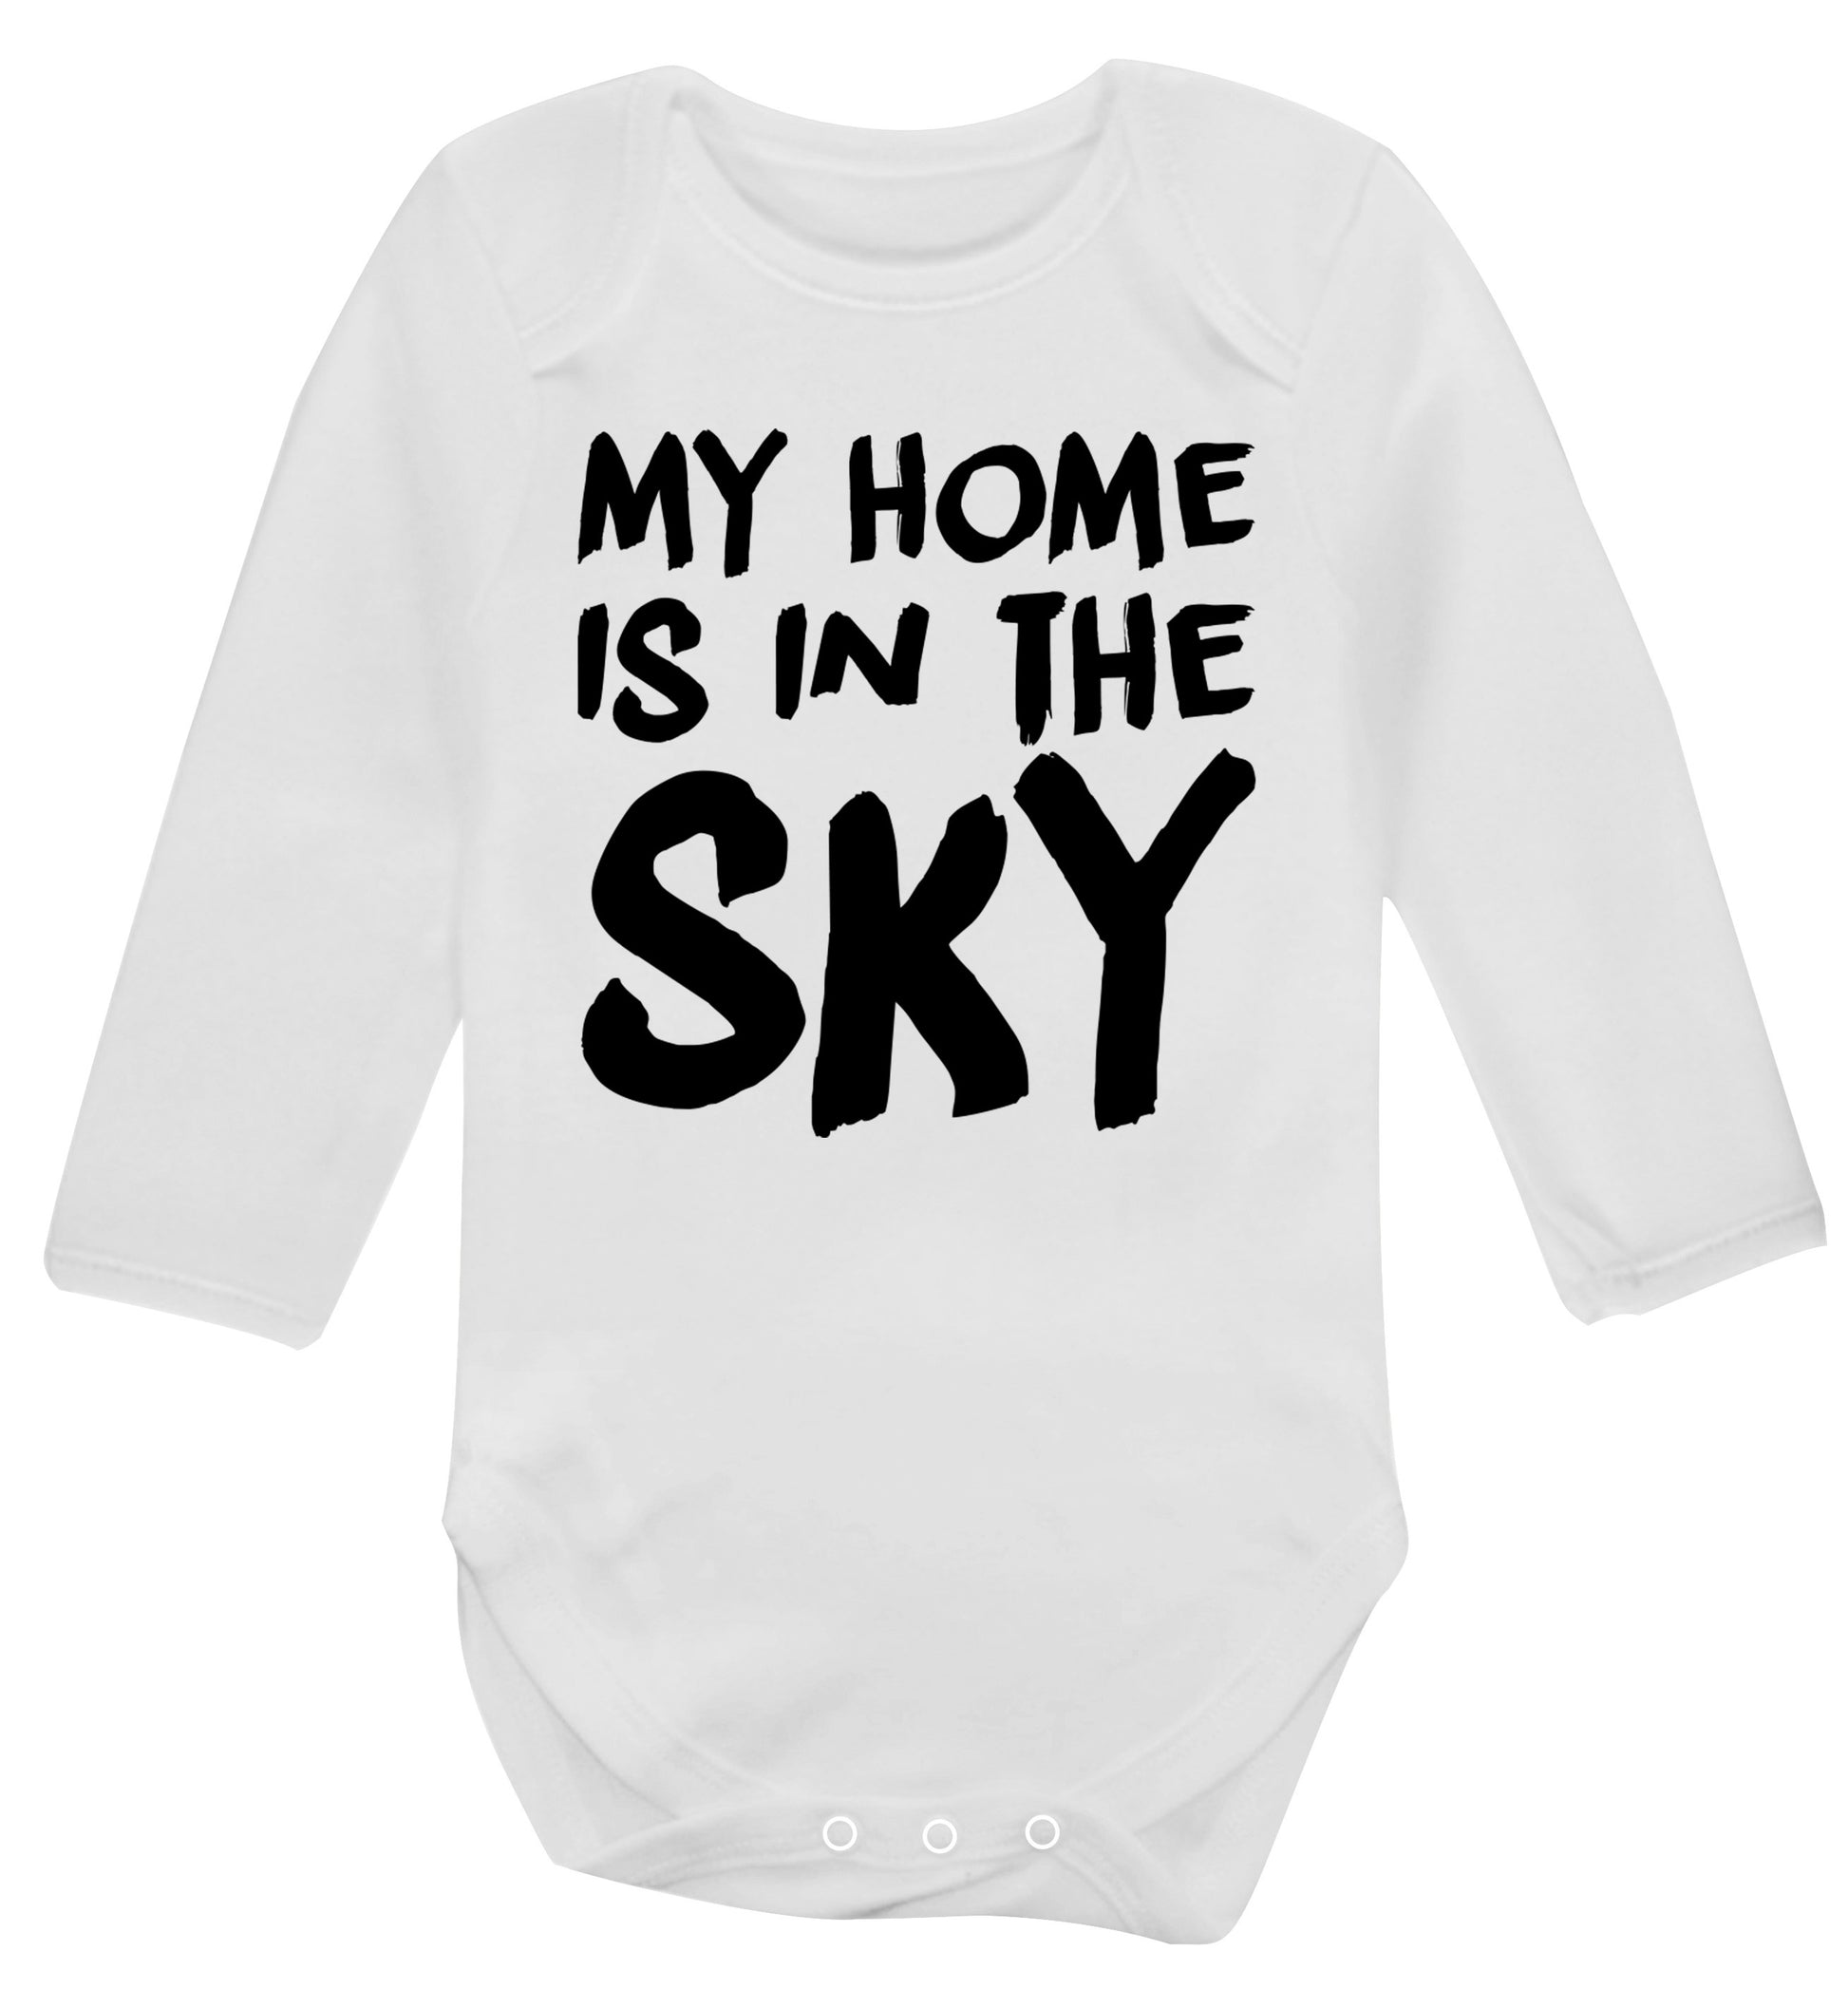 My home is in the sky Baby Vest long sleeved white 6-12 months